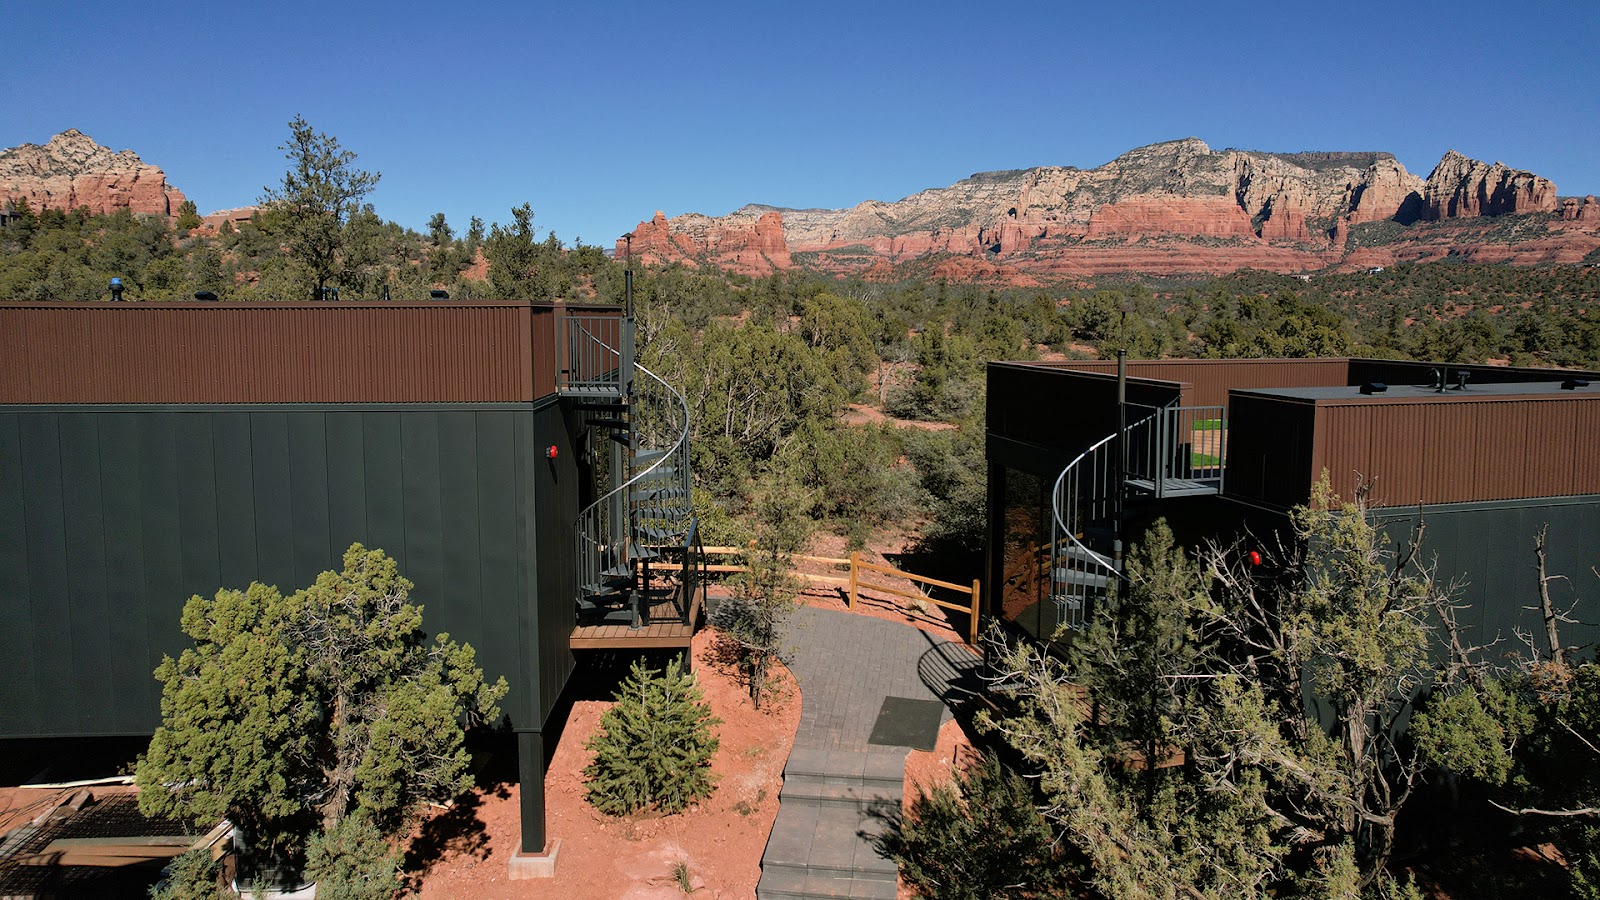 Ambiente, A Landscape Hotel in Sedona Arizona features metal from Western States Metal Roofing